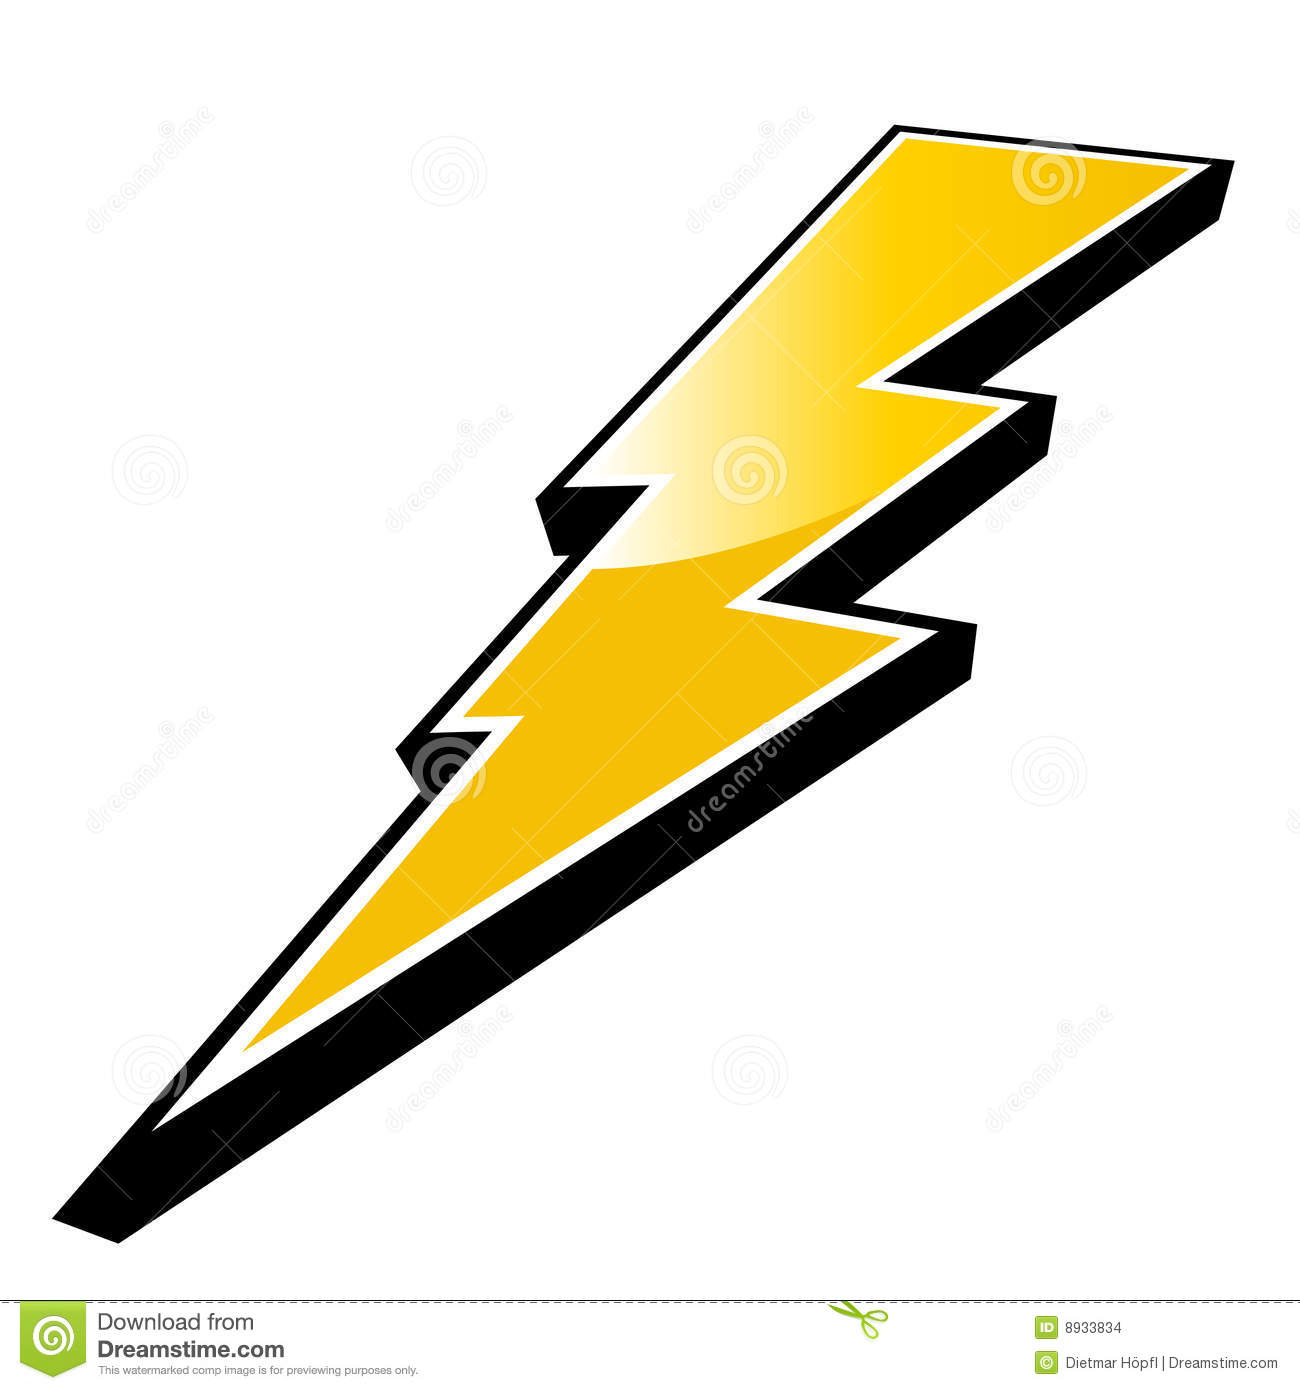 Jagged Lightening Symbol        Clipart Panda   Free Clipart Images